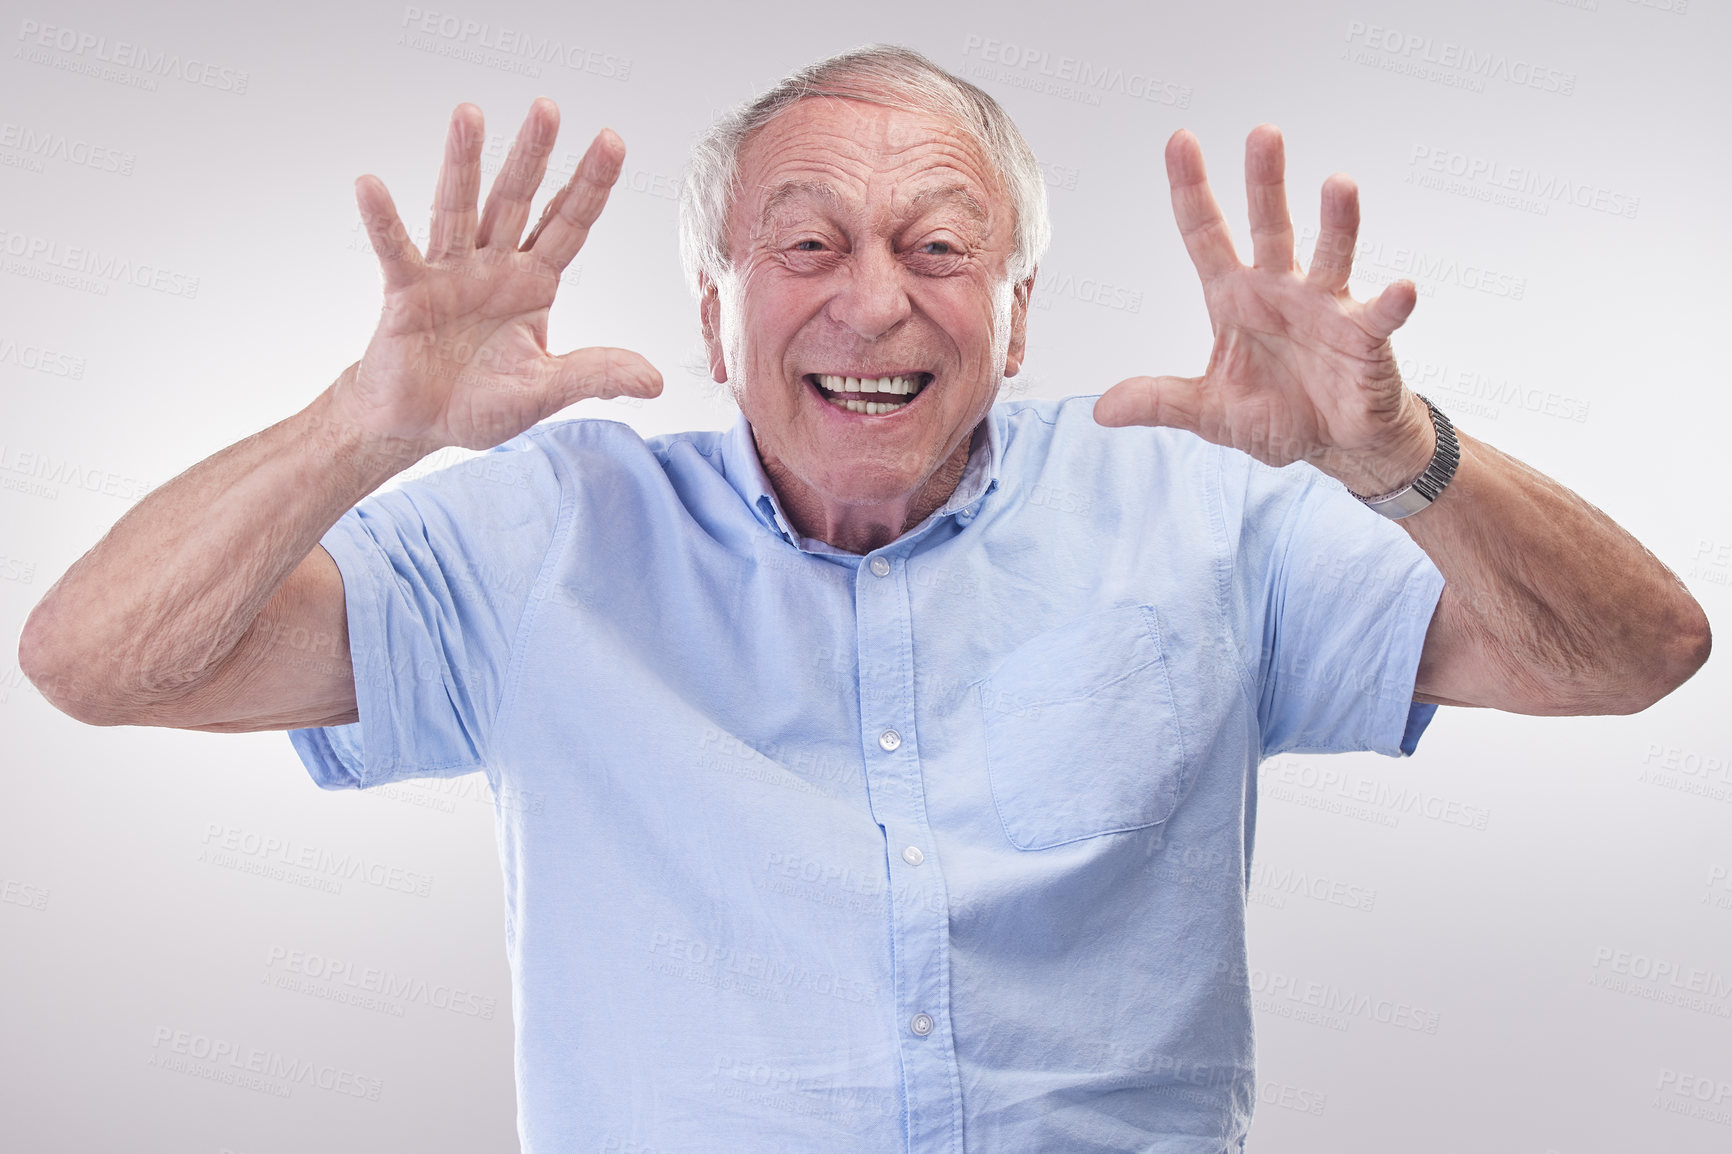 Buy stock photo Studio shot of a senior man making a playful gesture against a grey background